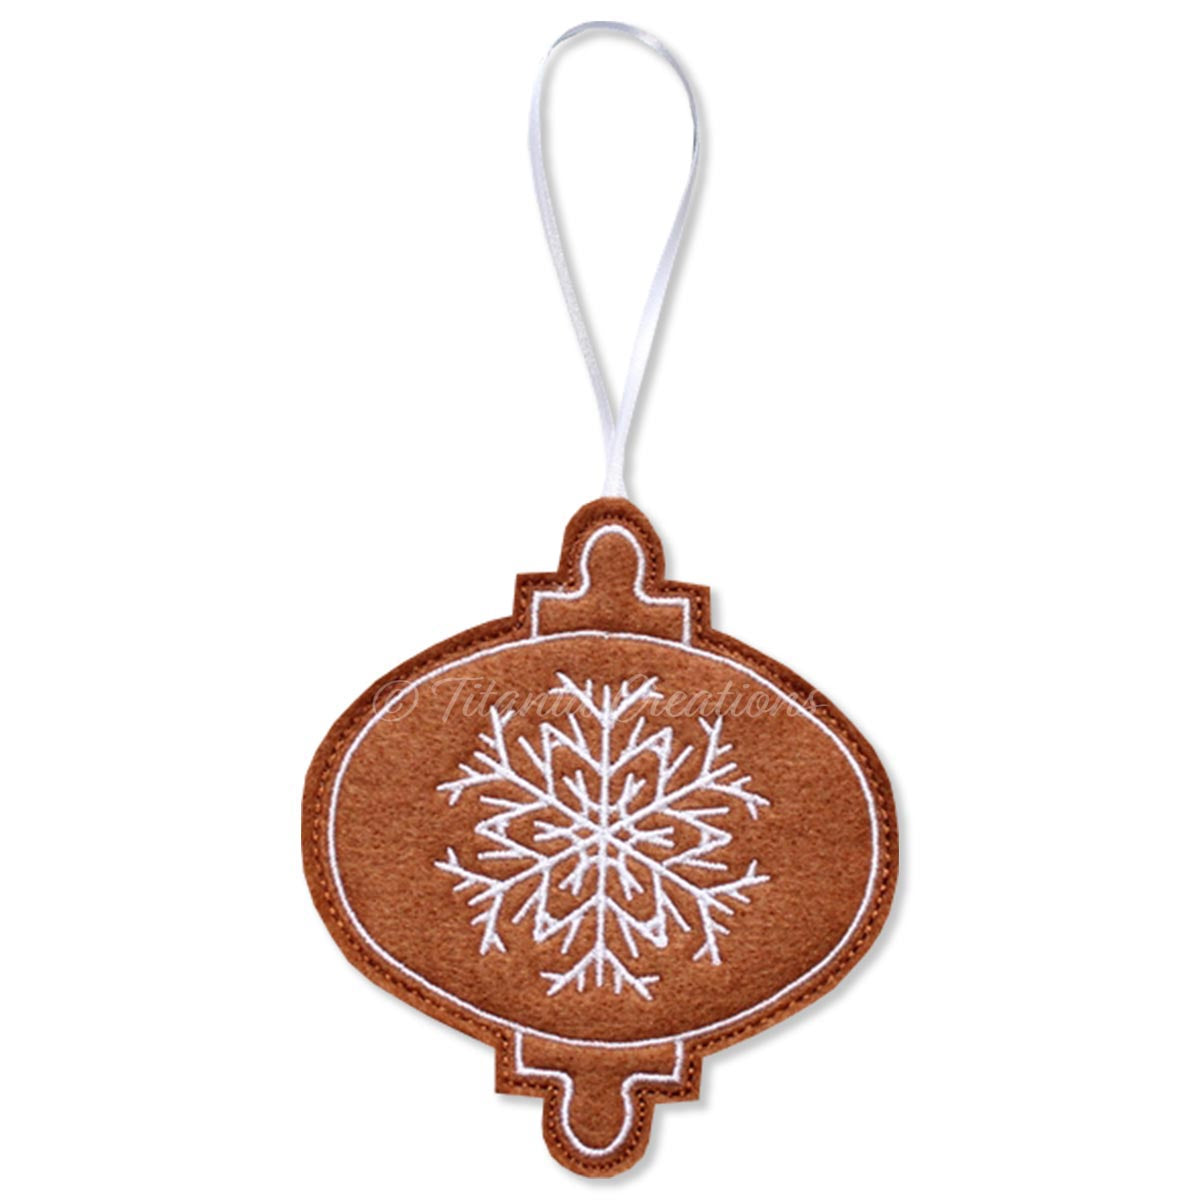 ITH Iced Gingerbread Bauble 4x4